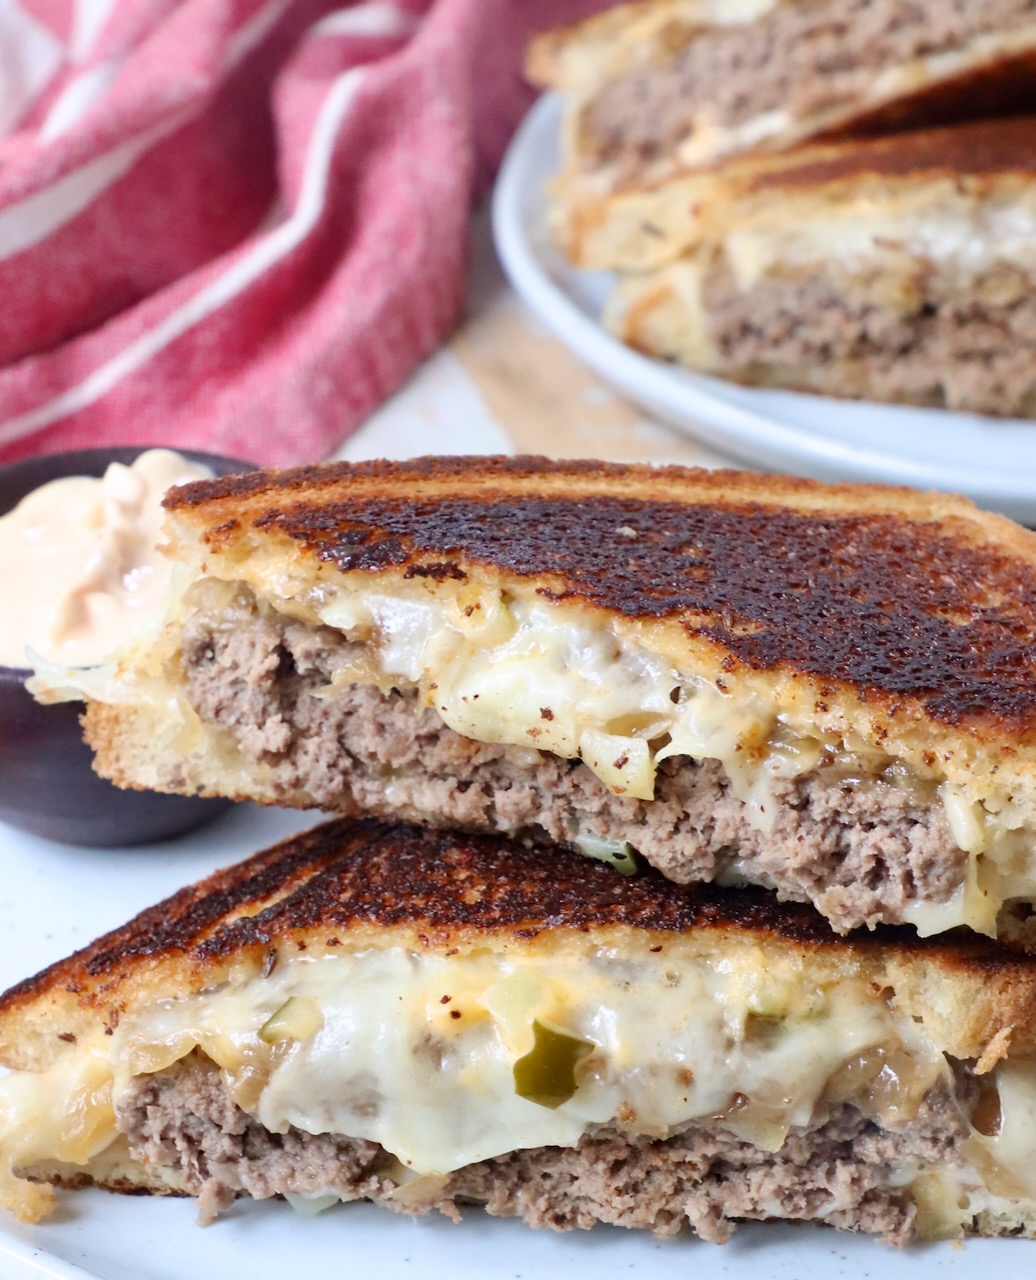 patty melt sliced in half and stacked up on a plate